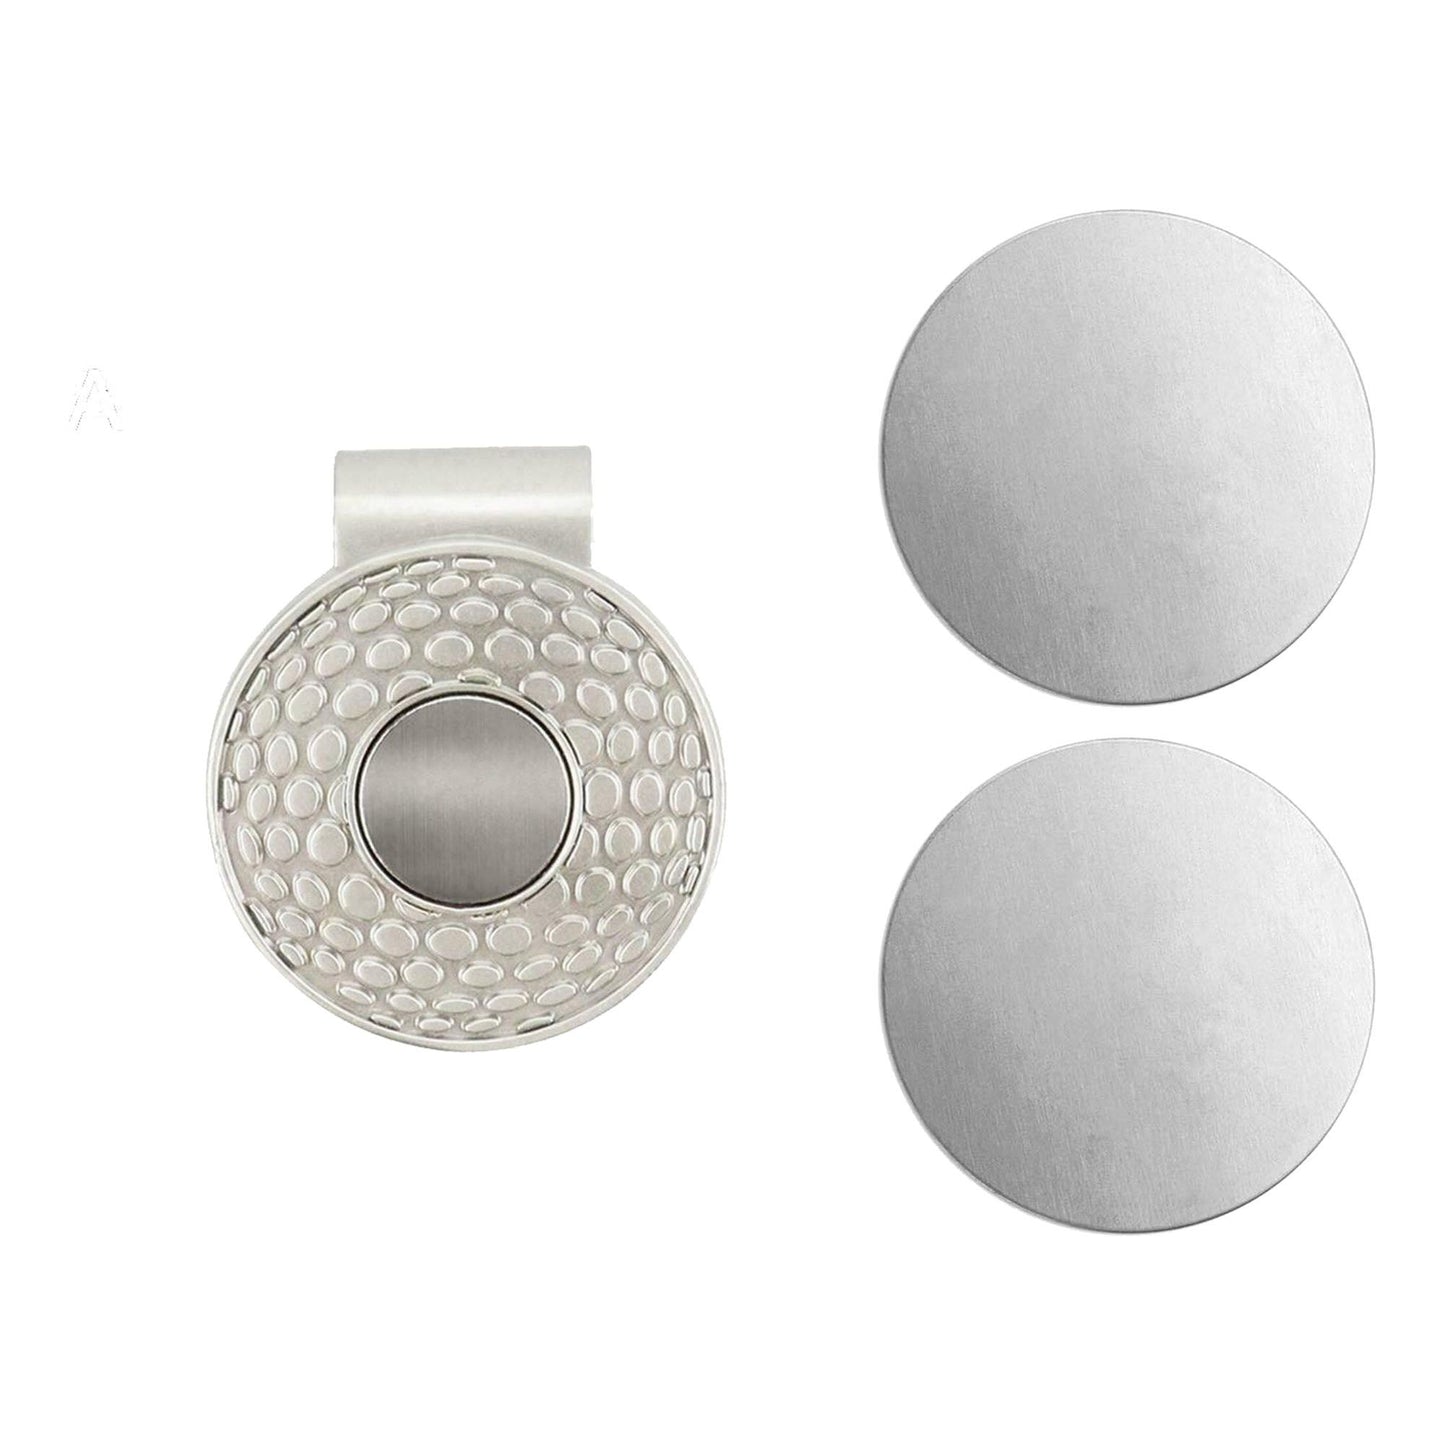 Golf Ball Markers and Magnetic Hat Clip 1 x Magnetic Hat Clip 2 x Golf Ball Markers - Ashton and Finch